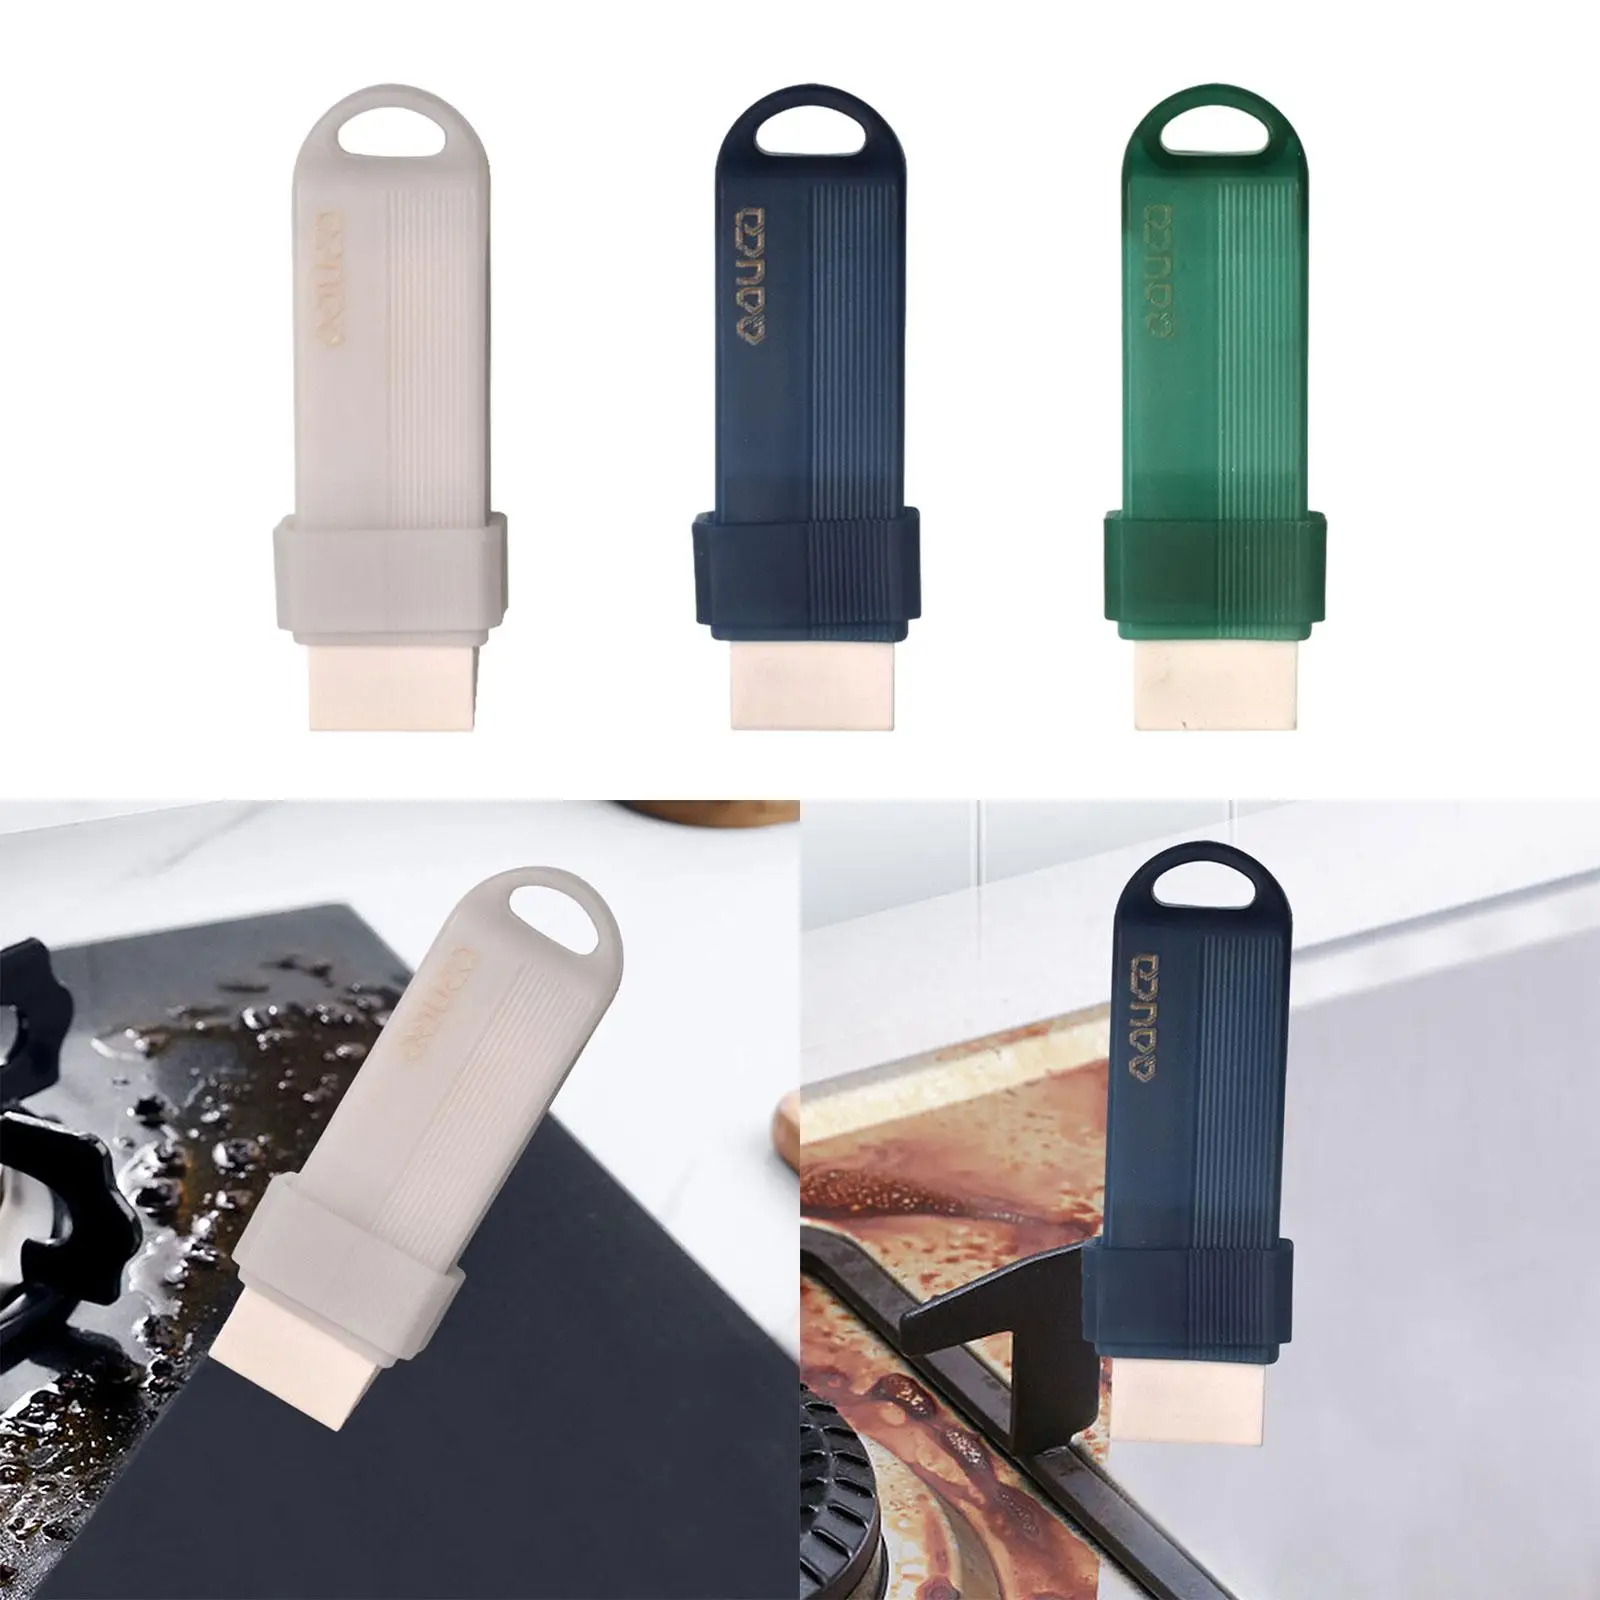 Rubber Cleaning Eraser Durable Household Cleaning Tool Lightweight Cleaner for Baseboard Kitchen Floor Dishes Shoes